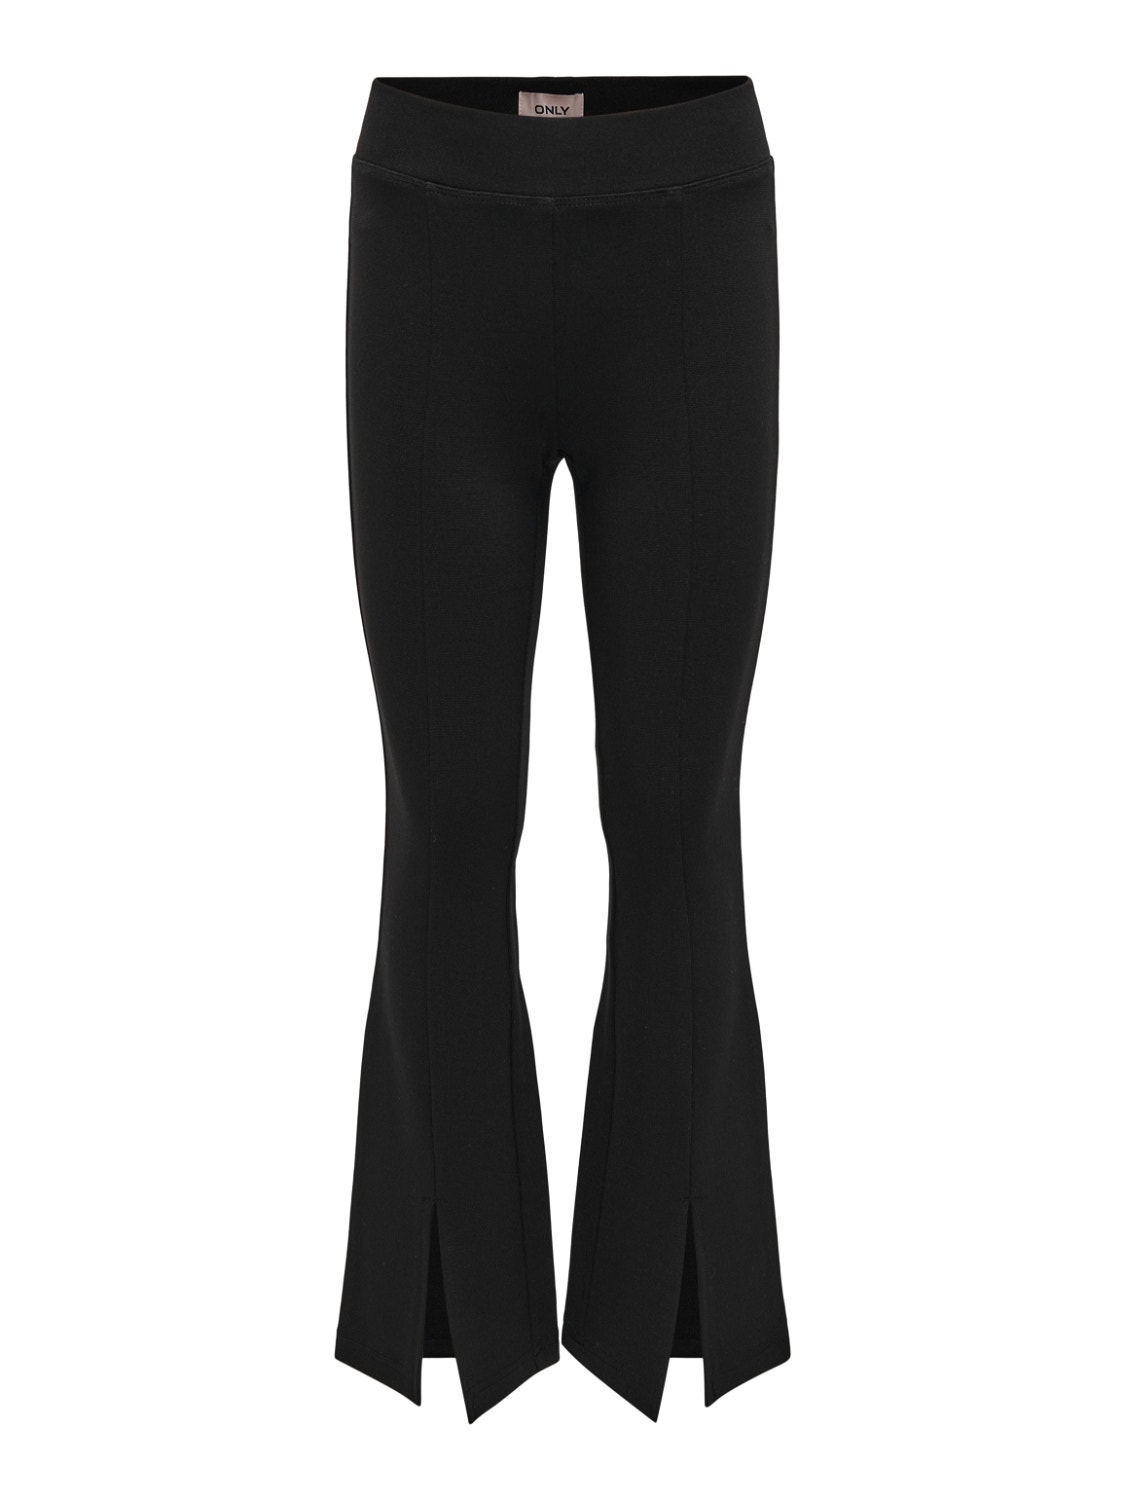 ONLY Flared trousers with slit -Black - 15236405